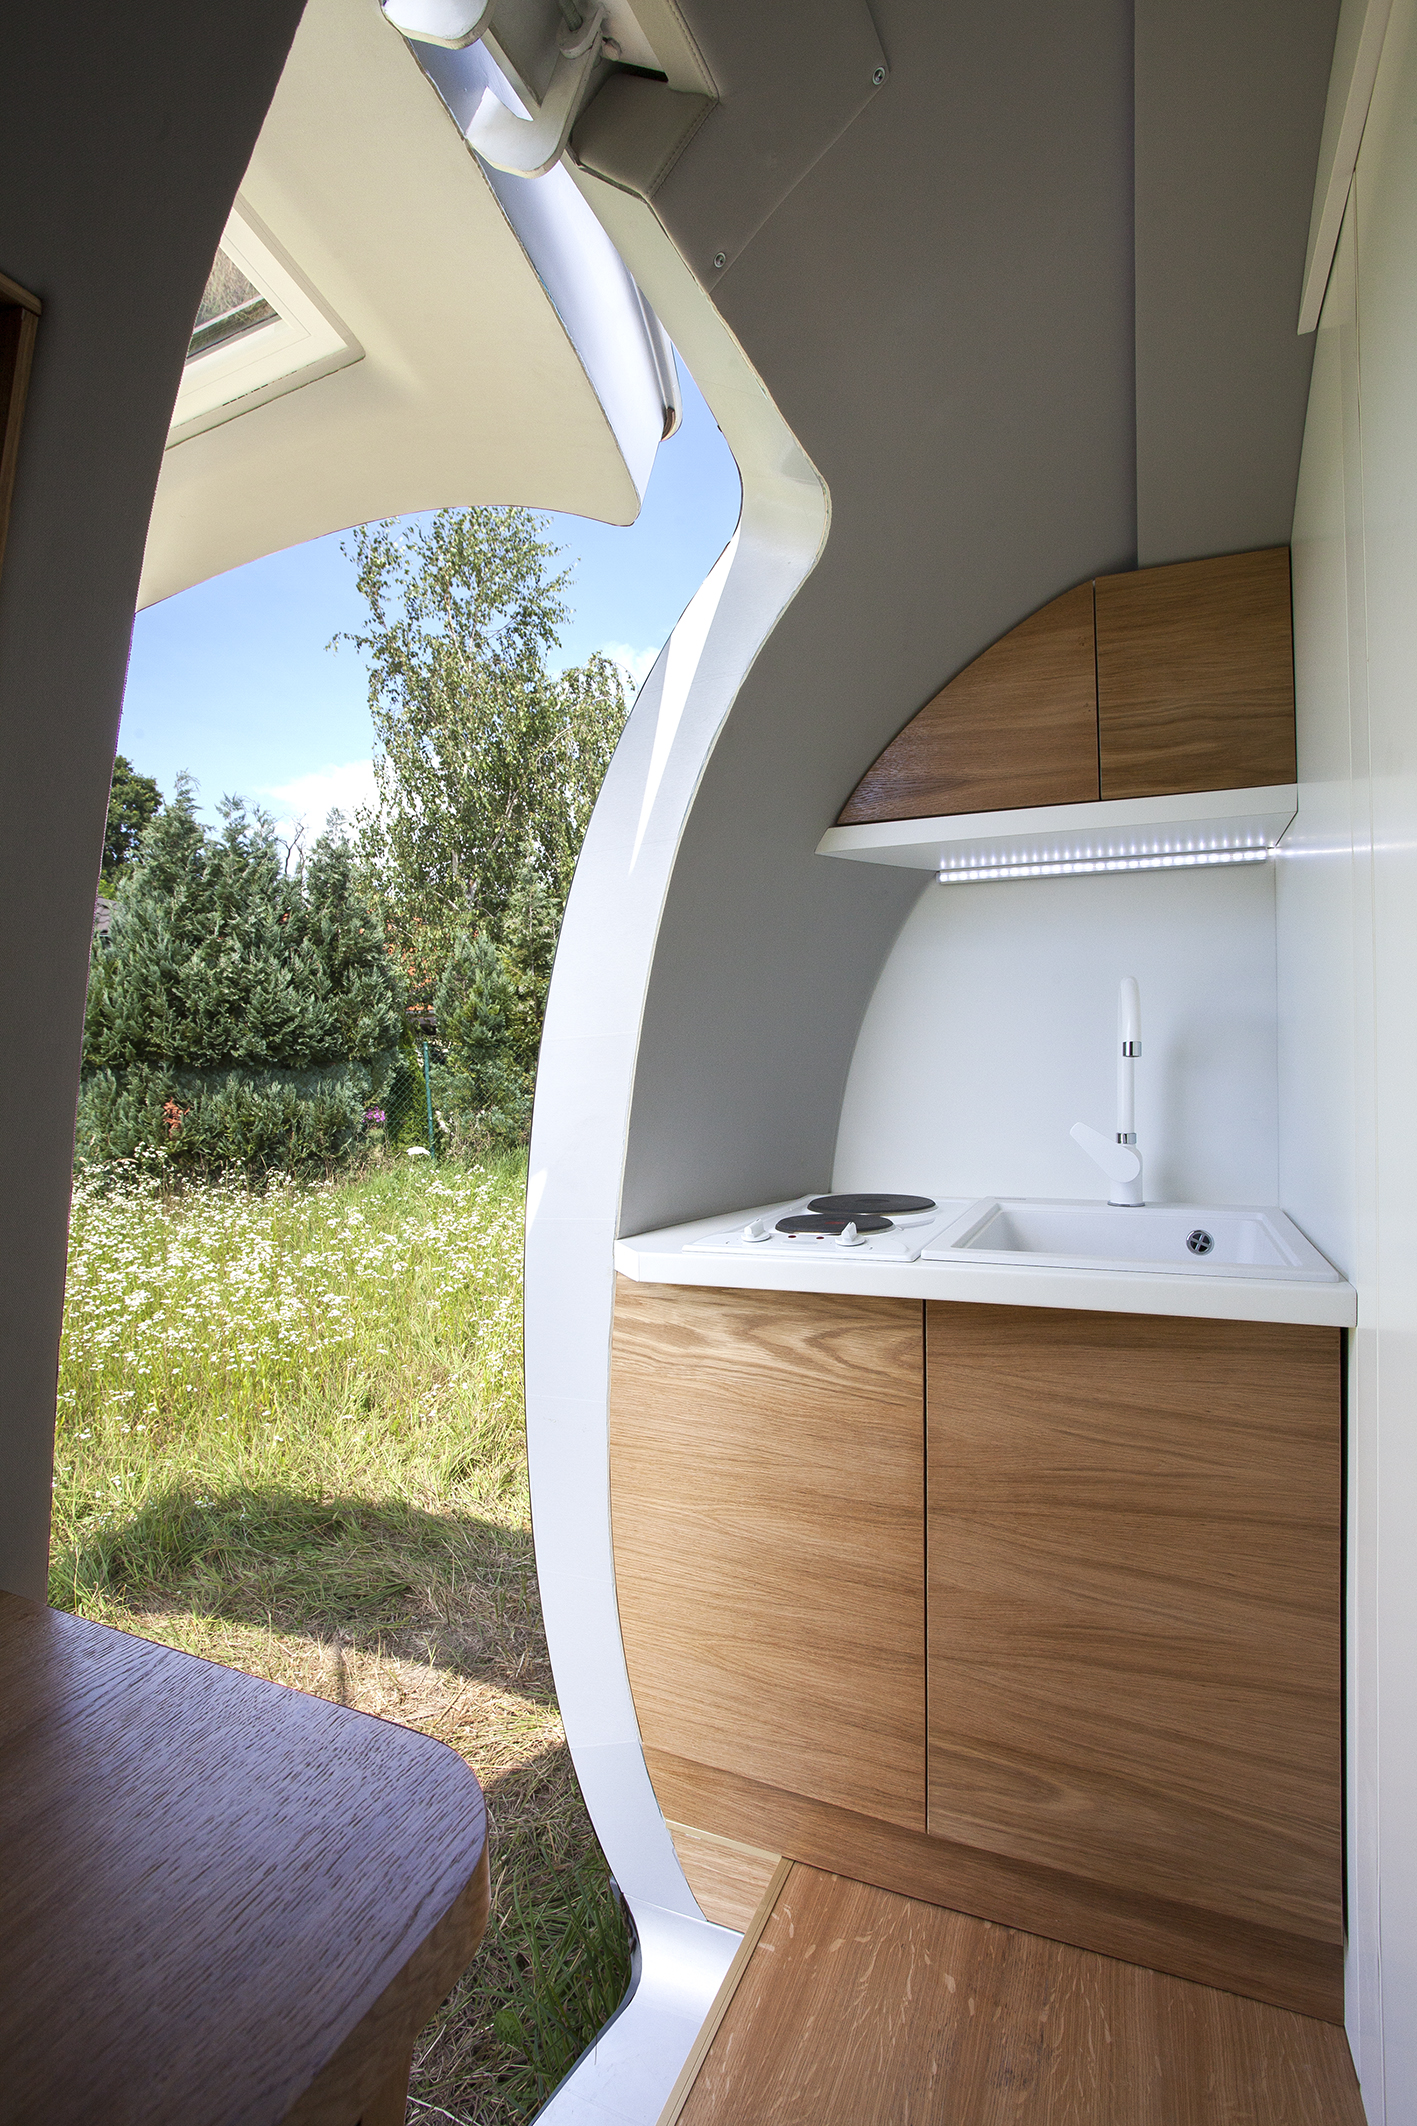 The Ecocapsule's kitchenette with a sink, two burners, and storage cabinets.